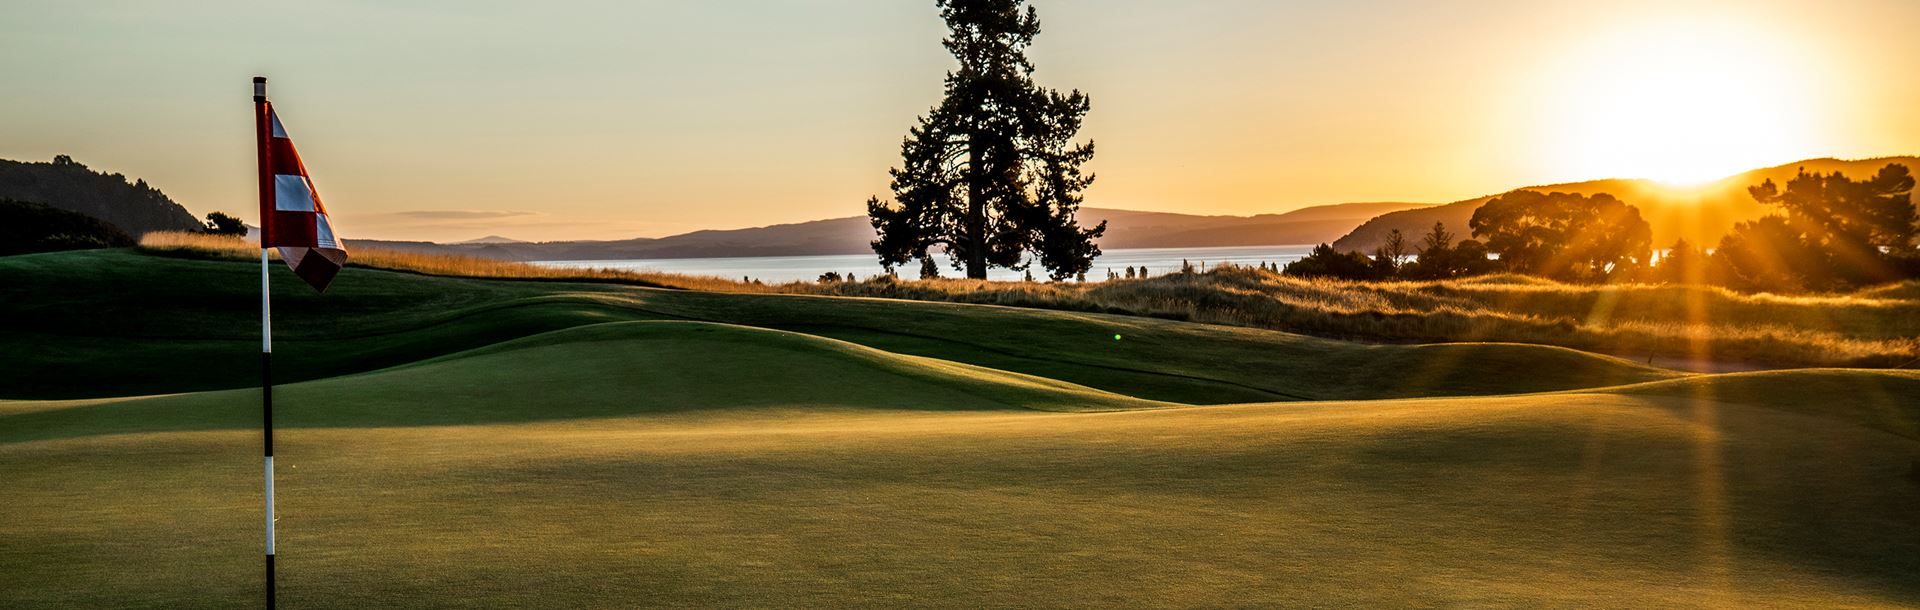 Dusk view looking from a green to the distant lake Taupo at The Kinloch Club Golf Resort